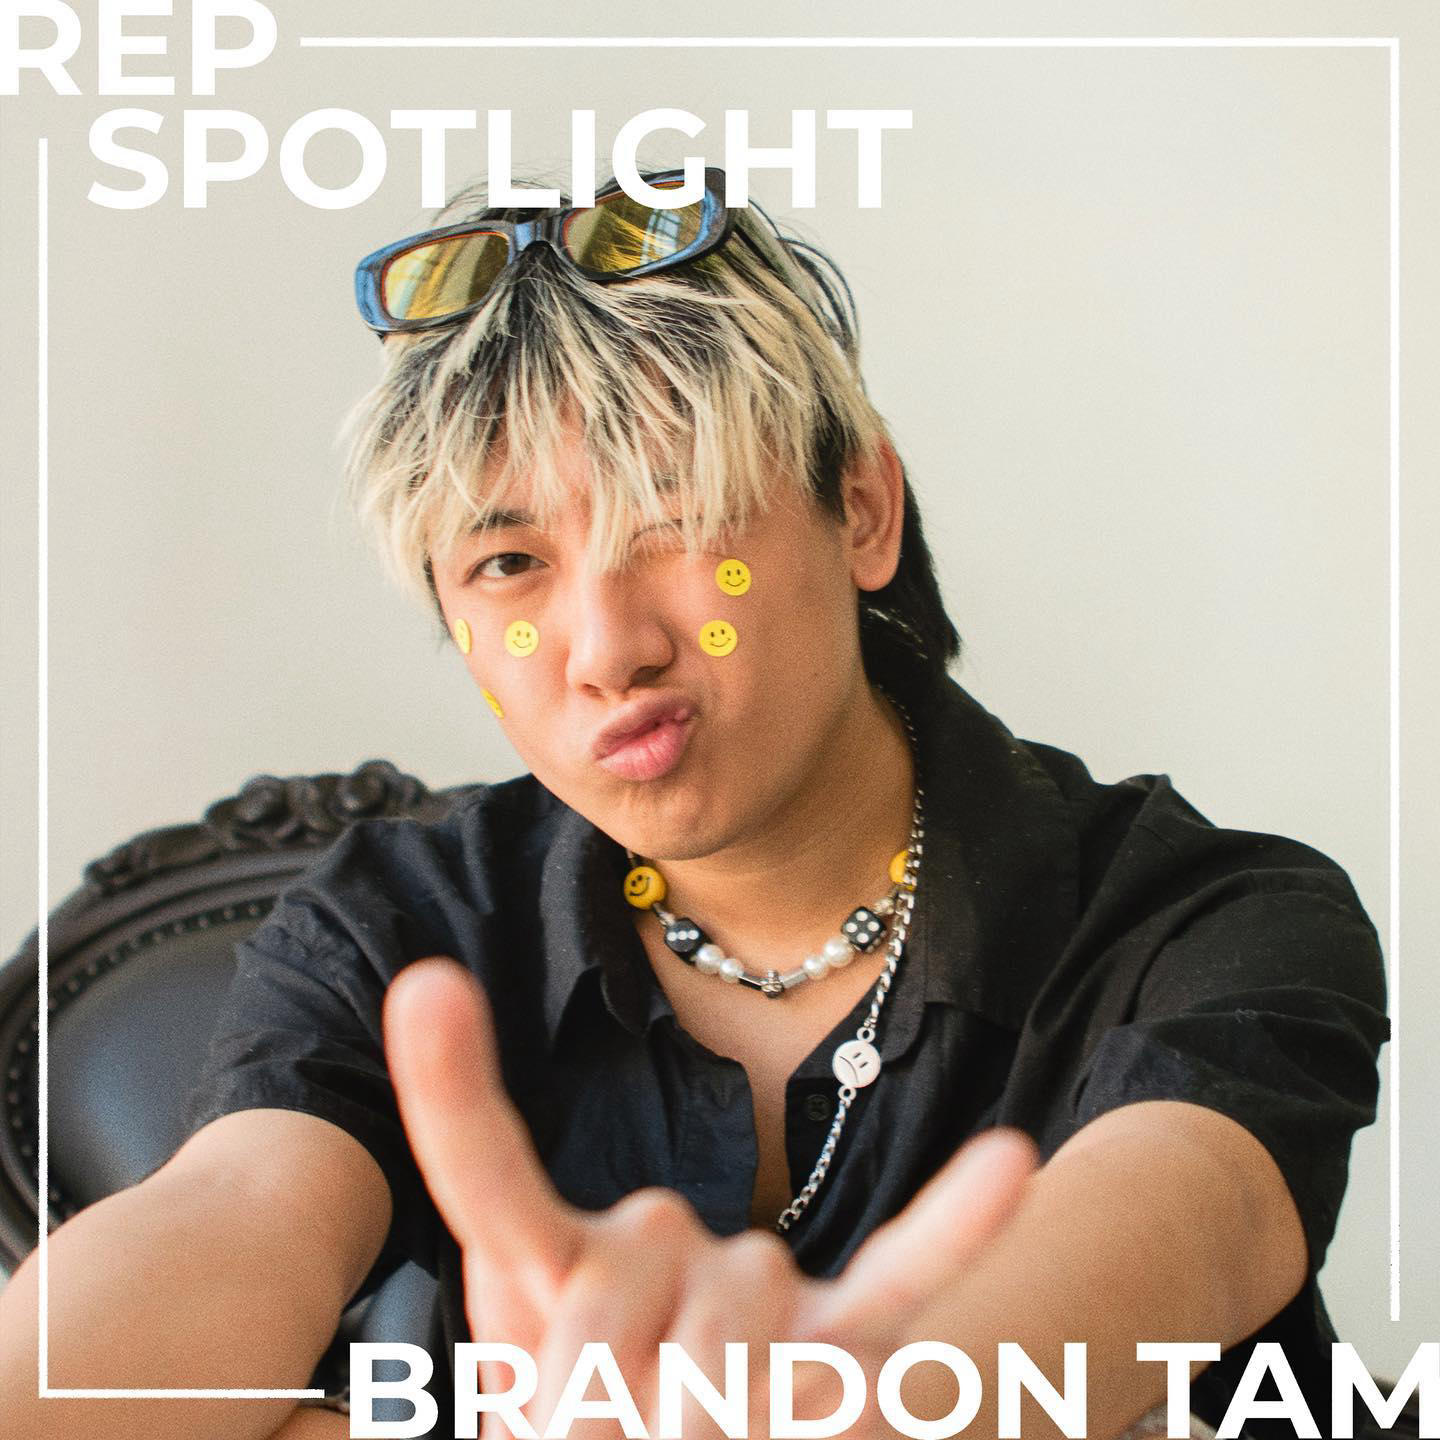 image  1 Sony Music U - Back with another #repspotlight this week featuring one of our Los Angeles reps #bran